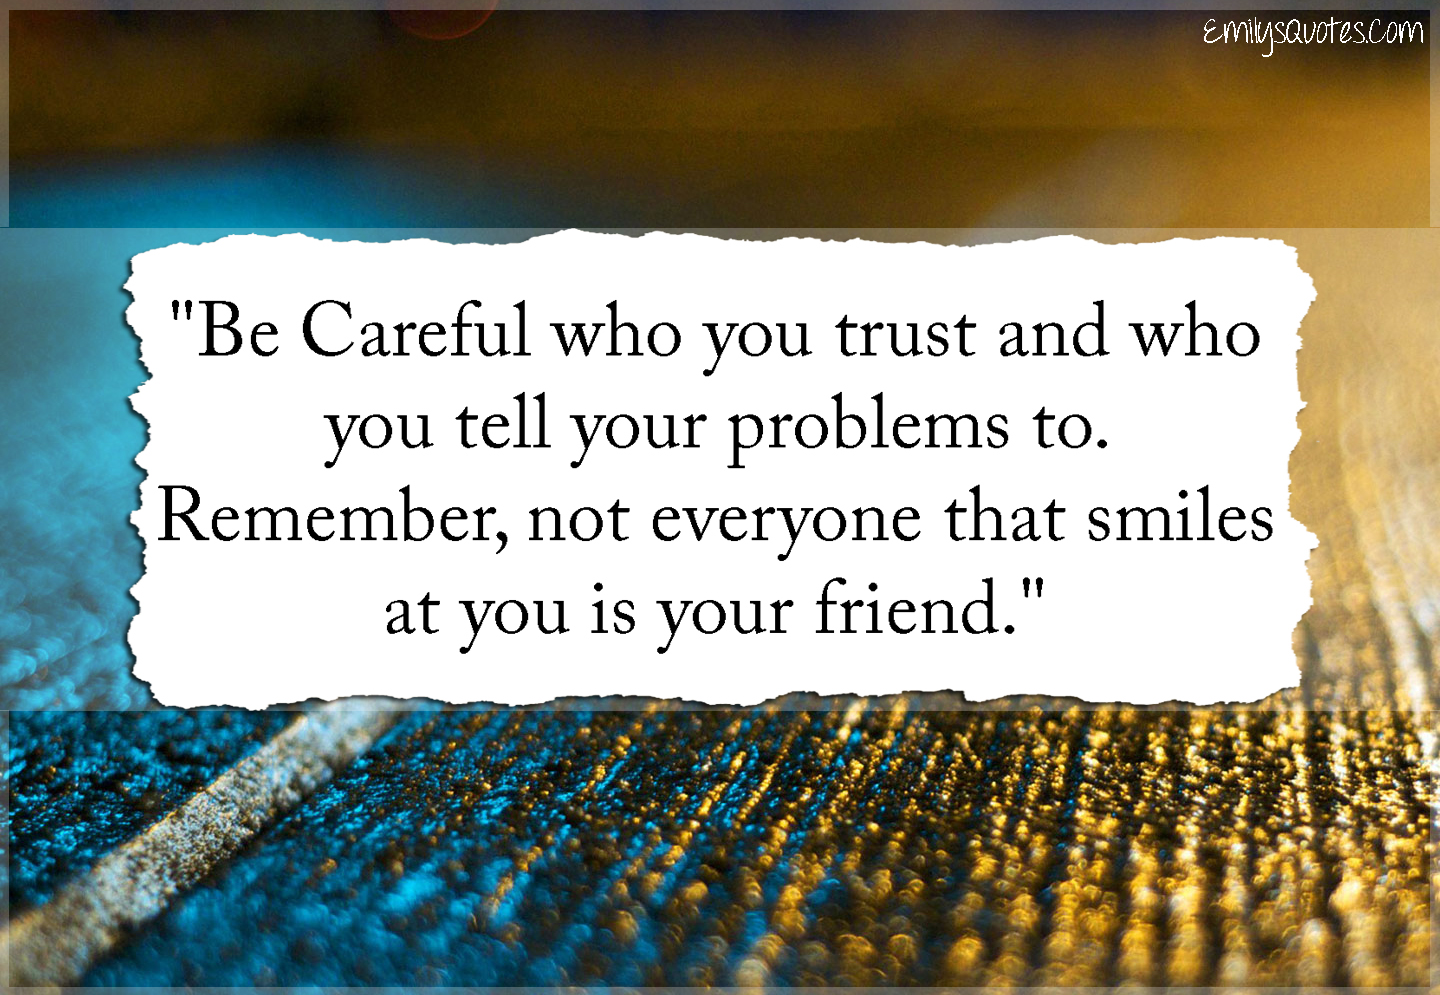 Be Careful who you trust and who you tell your problems to. Remember